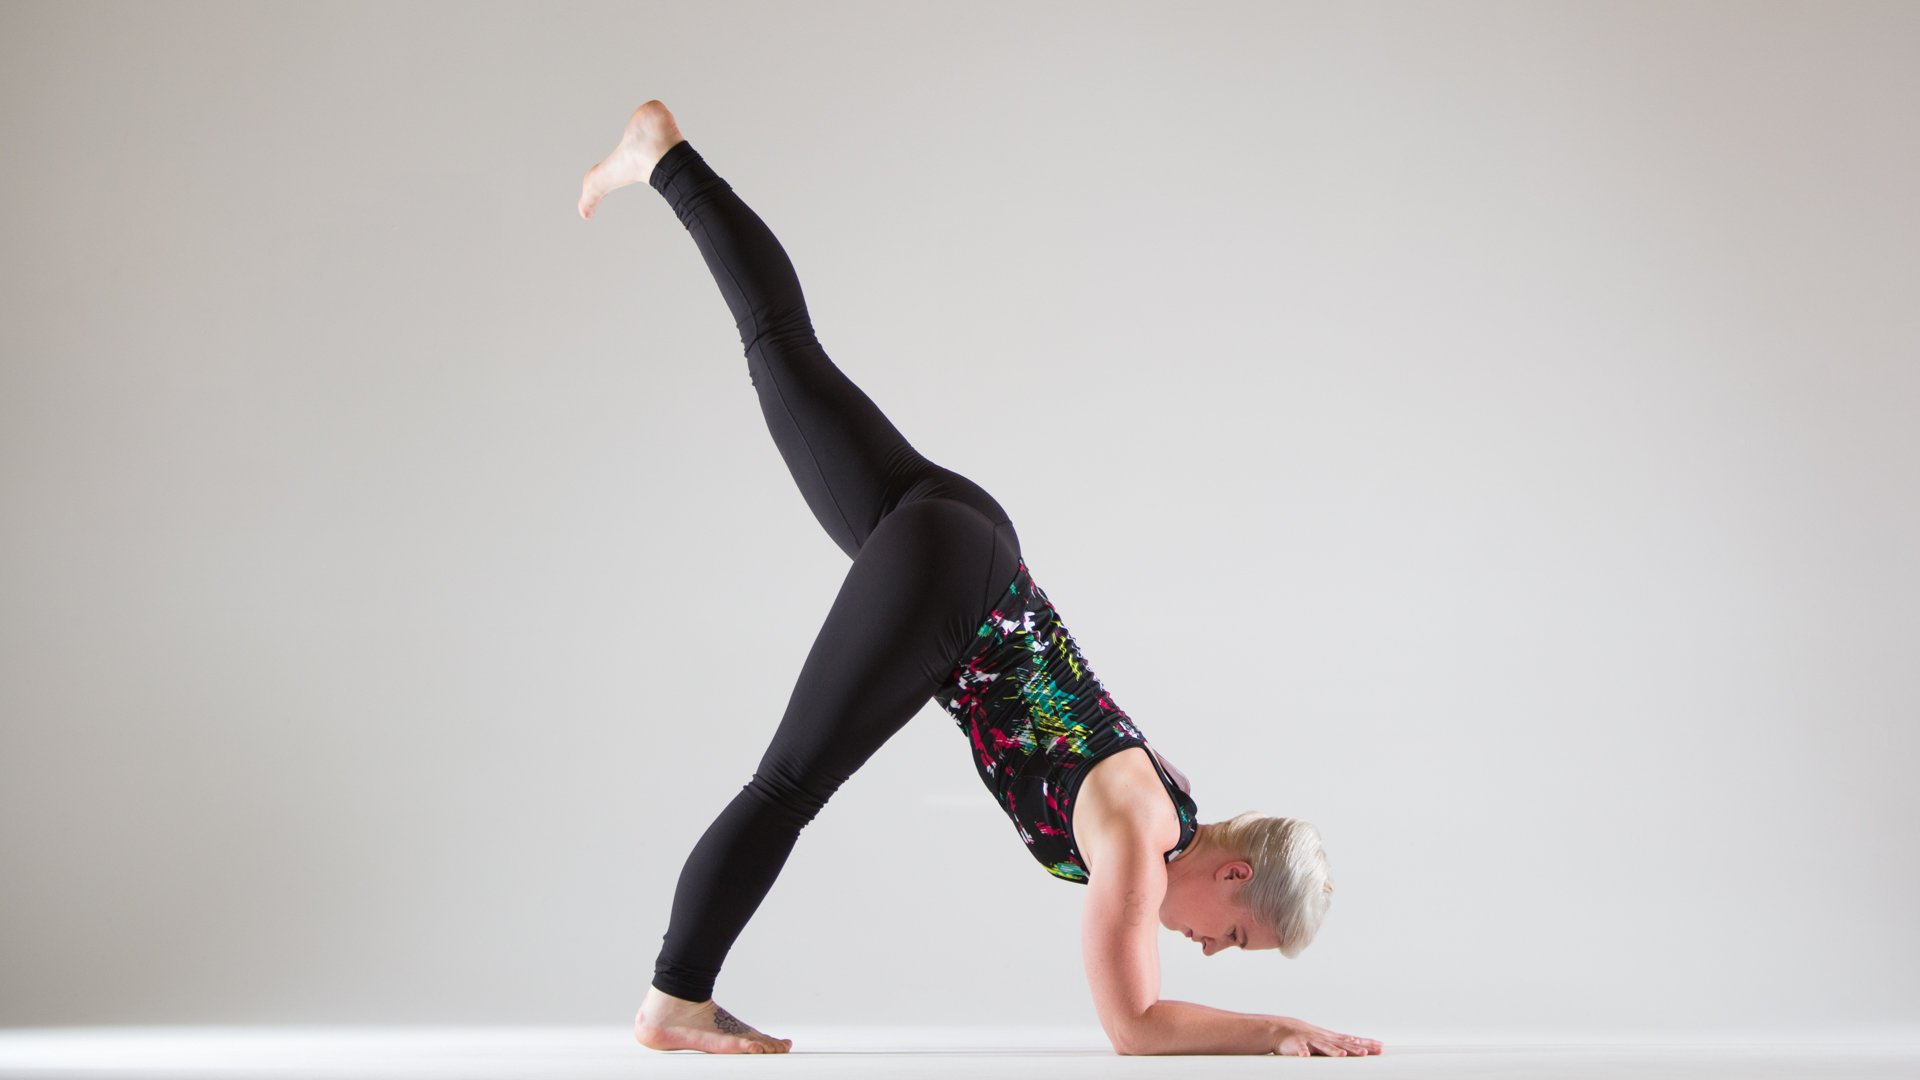 Practice forearm stands with support from the Trapeze! #trapezeyoga  #forearmstand #yoga #yogabody #yogabodytrapeze